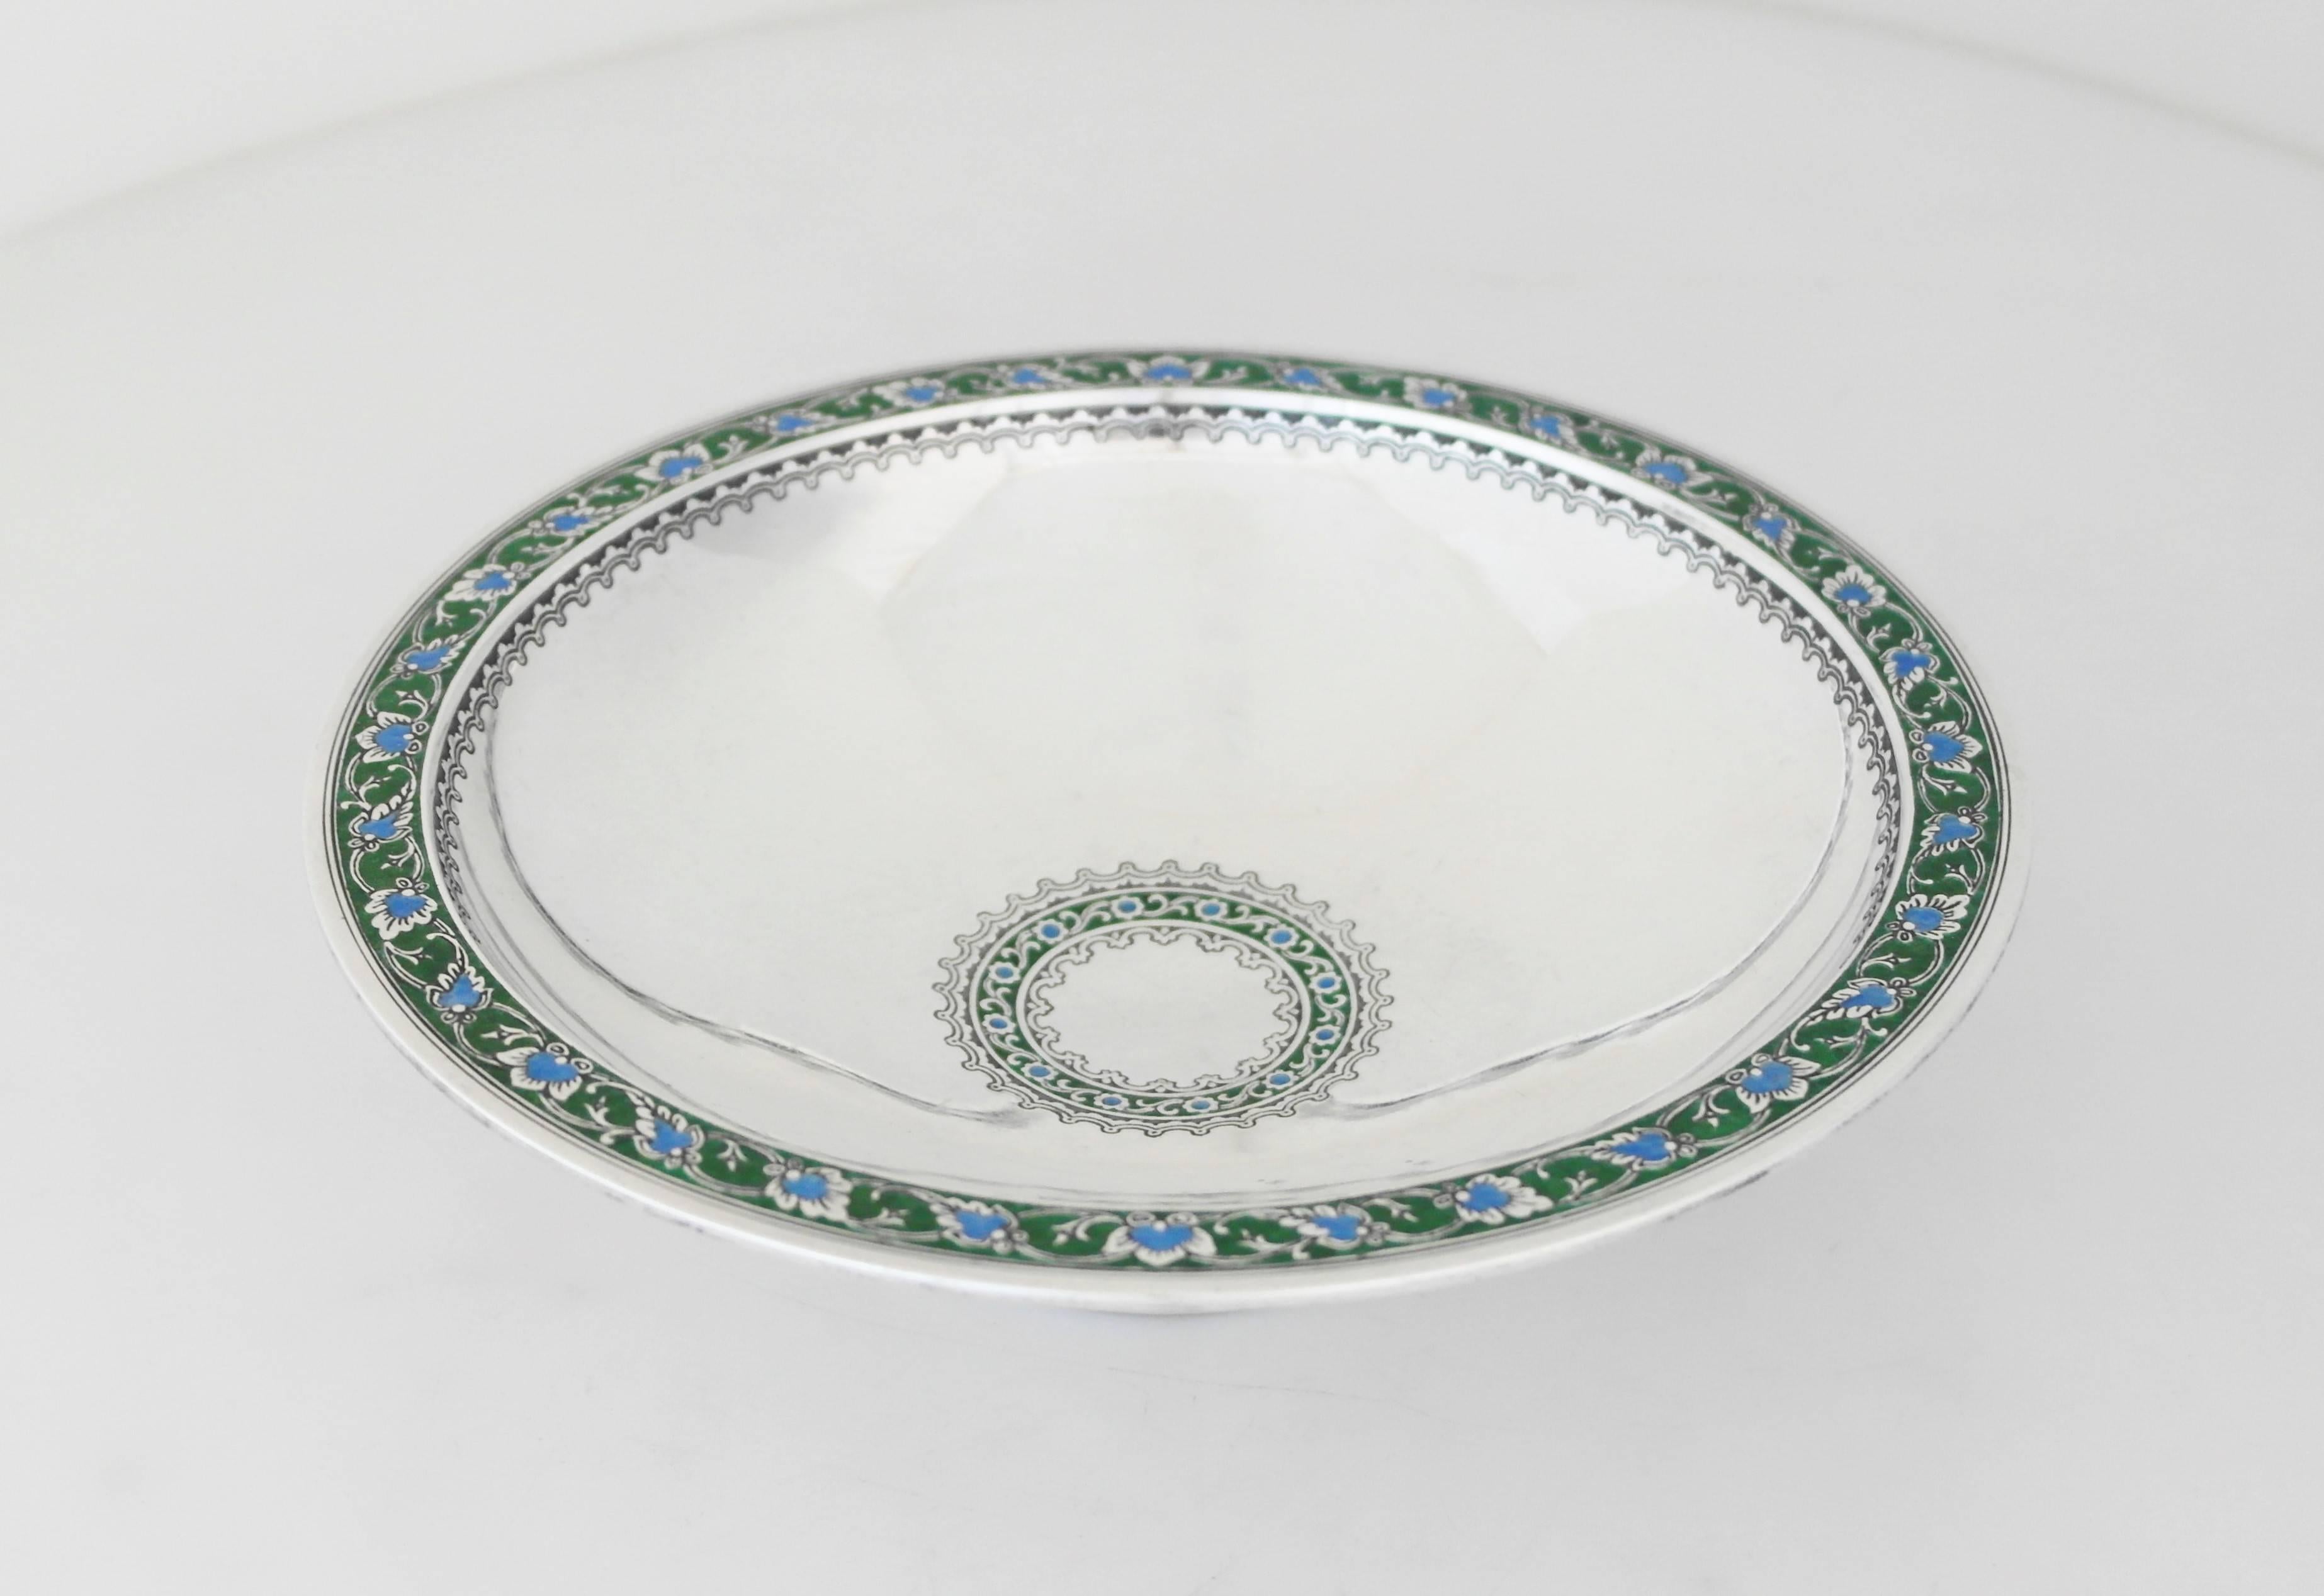 Early 20th Century Spectacular Tiffany & Co Art Deco Sterling Silver & Enamel Centerpiece Bowl 1920